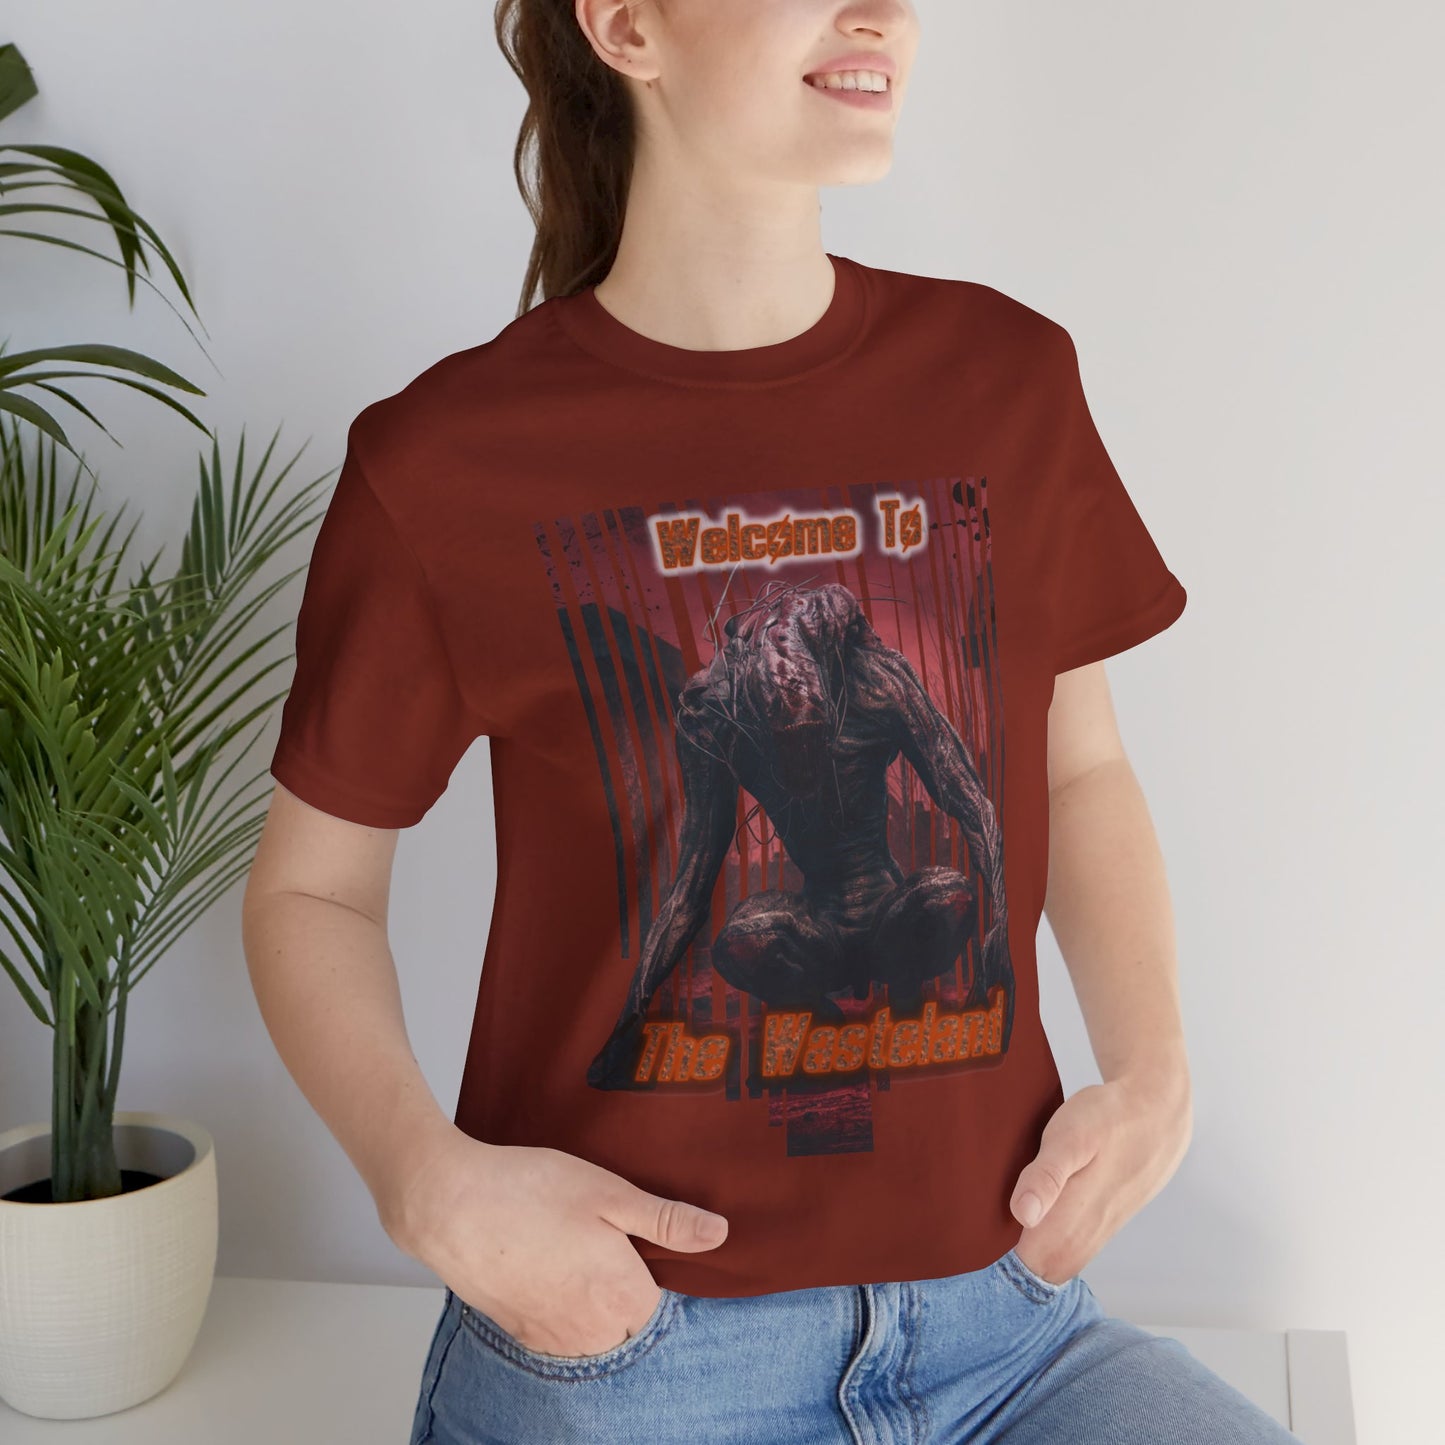 Welcome To The Wasteland Jersey Short Sleeve Tee